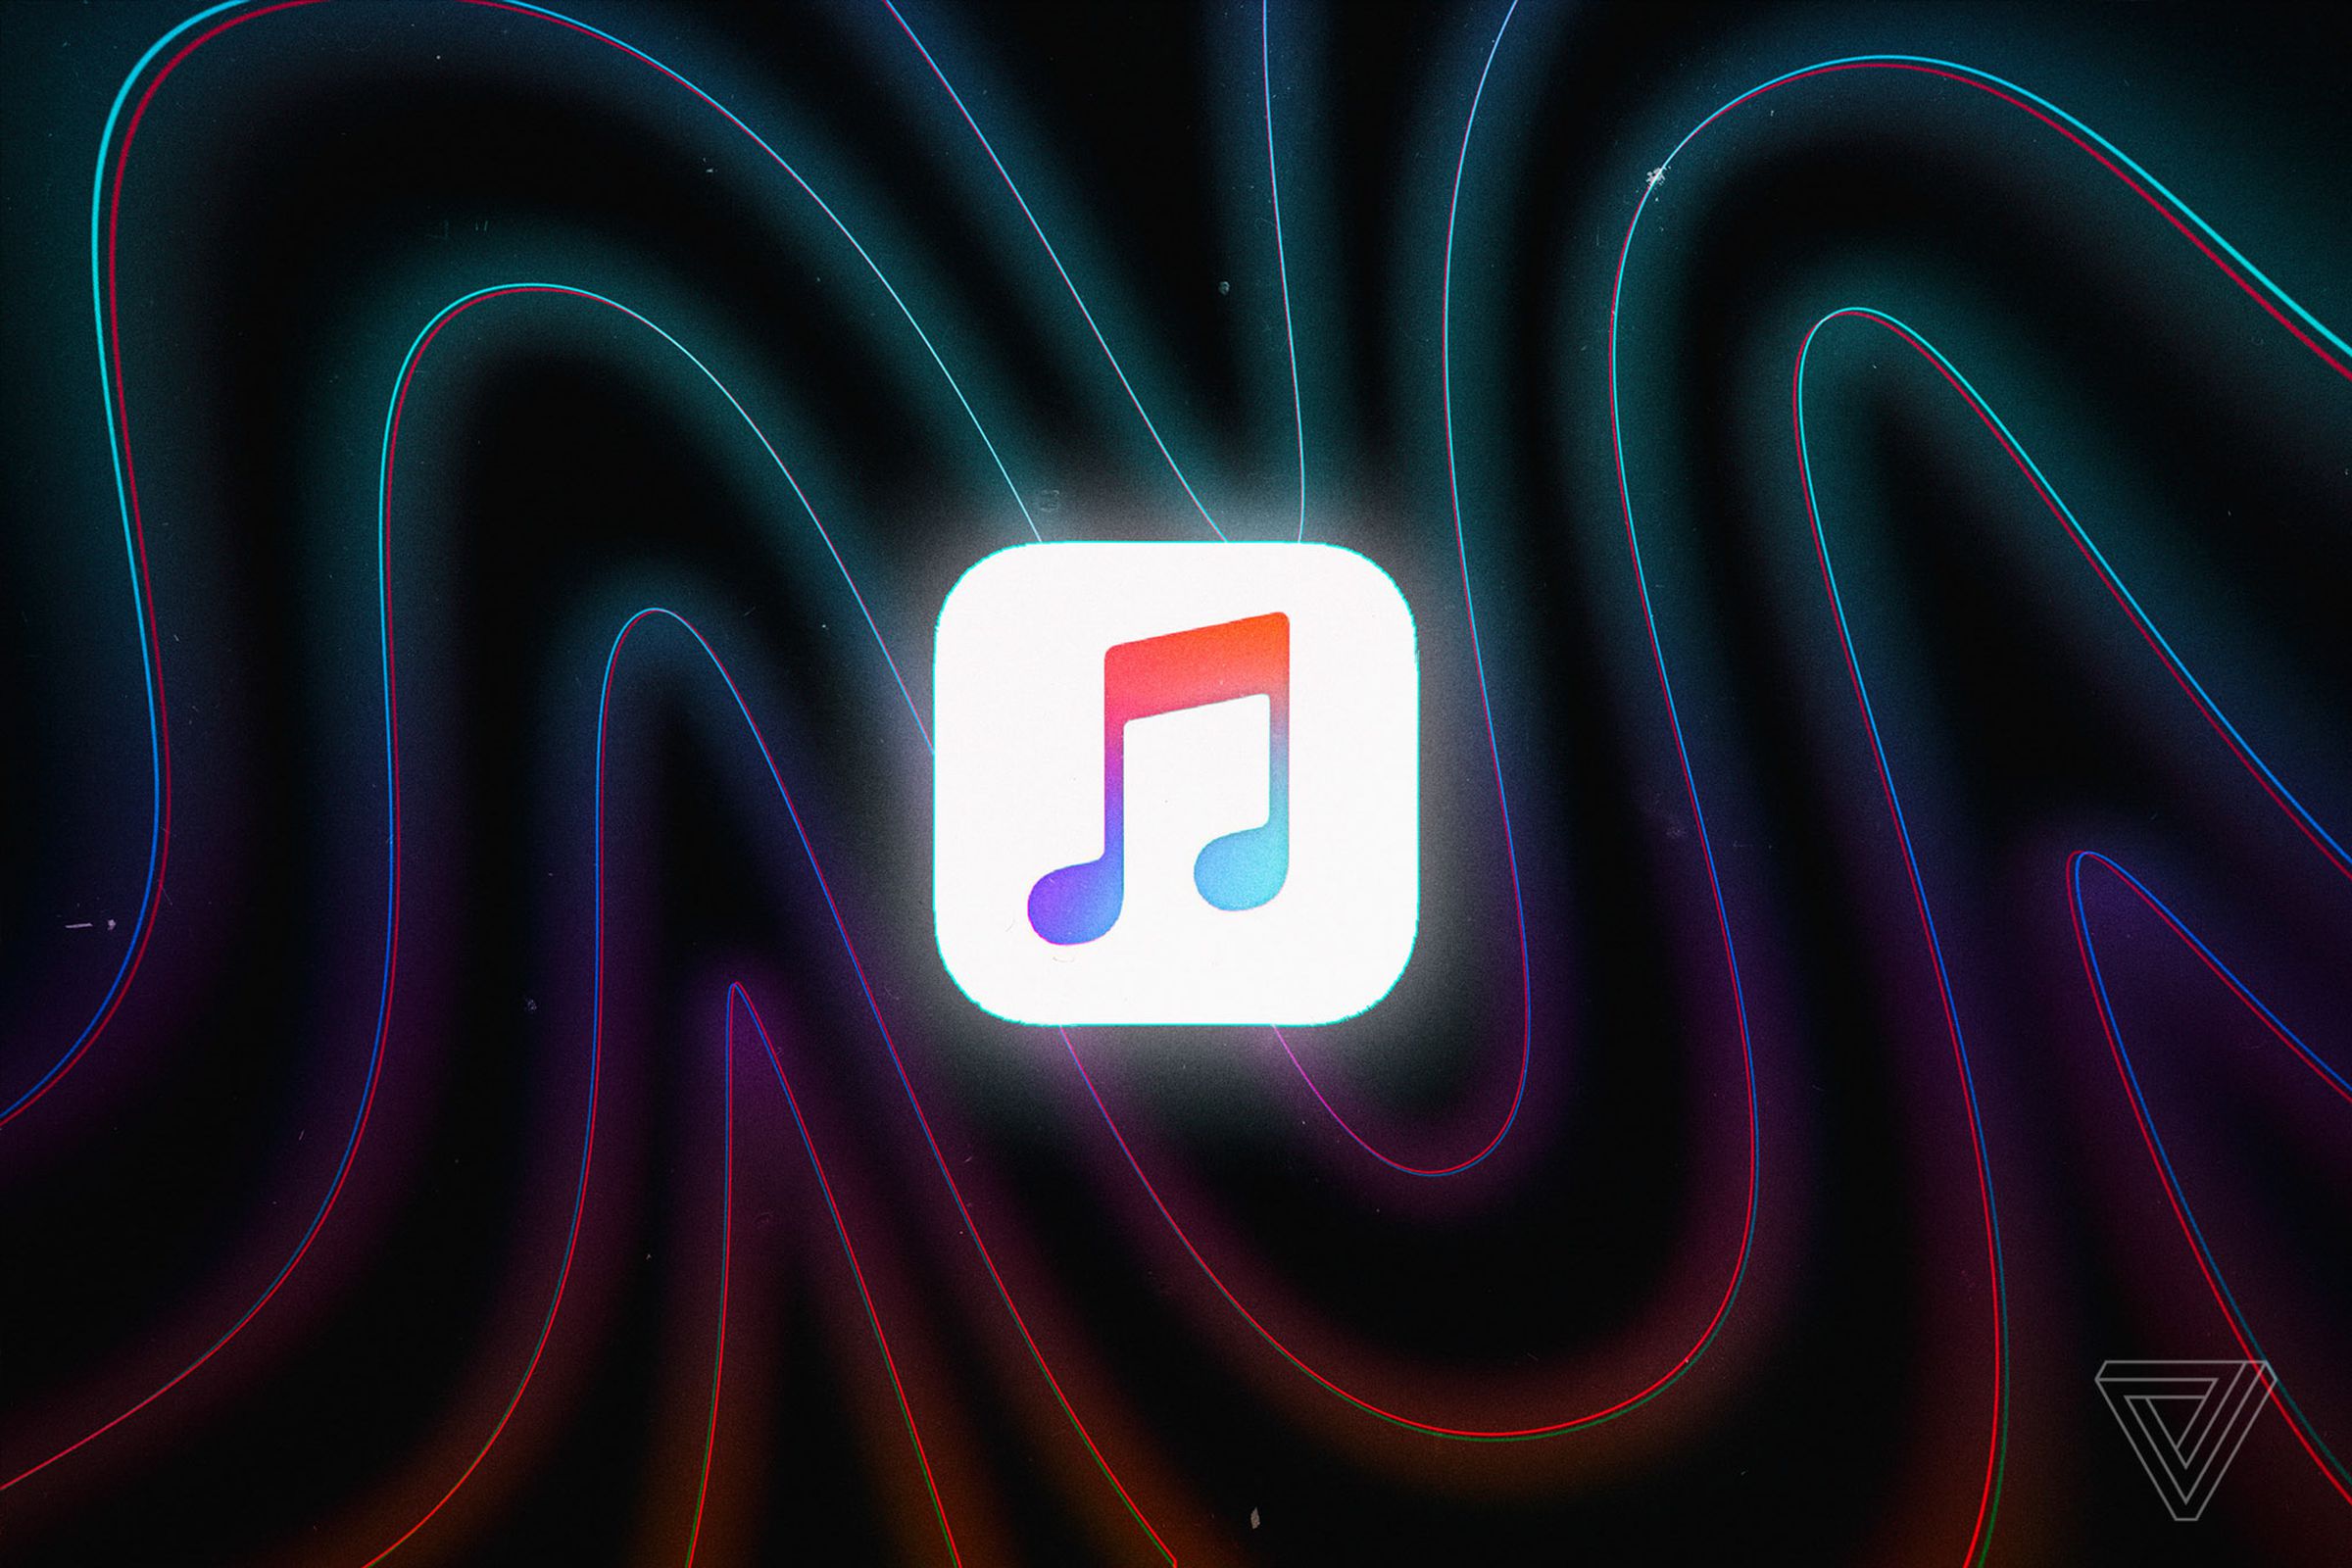 The Apple Music logo on a background with a wave pattern